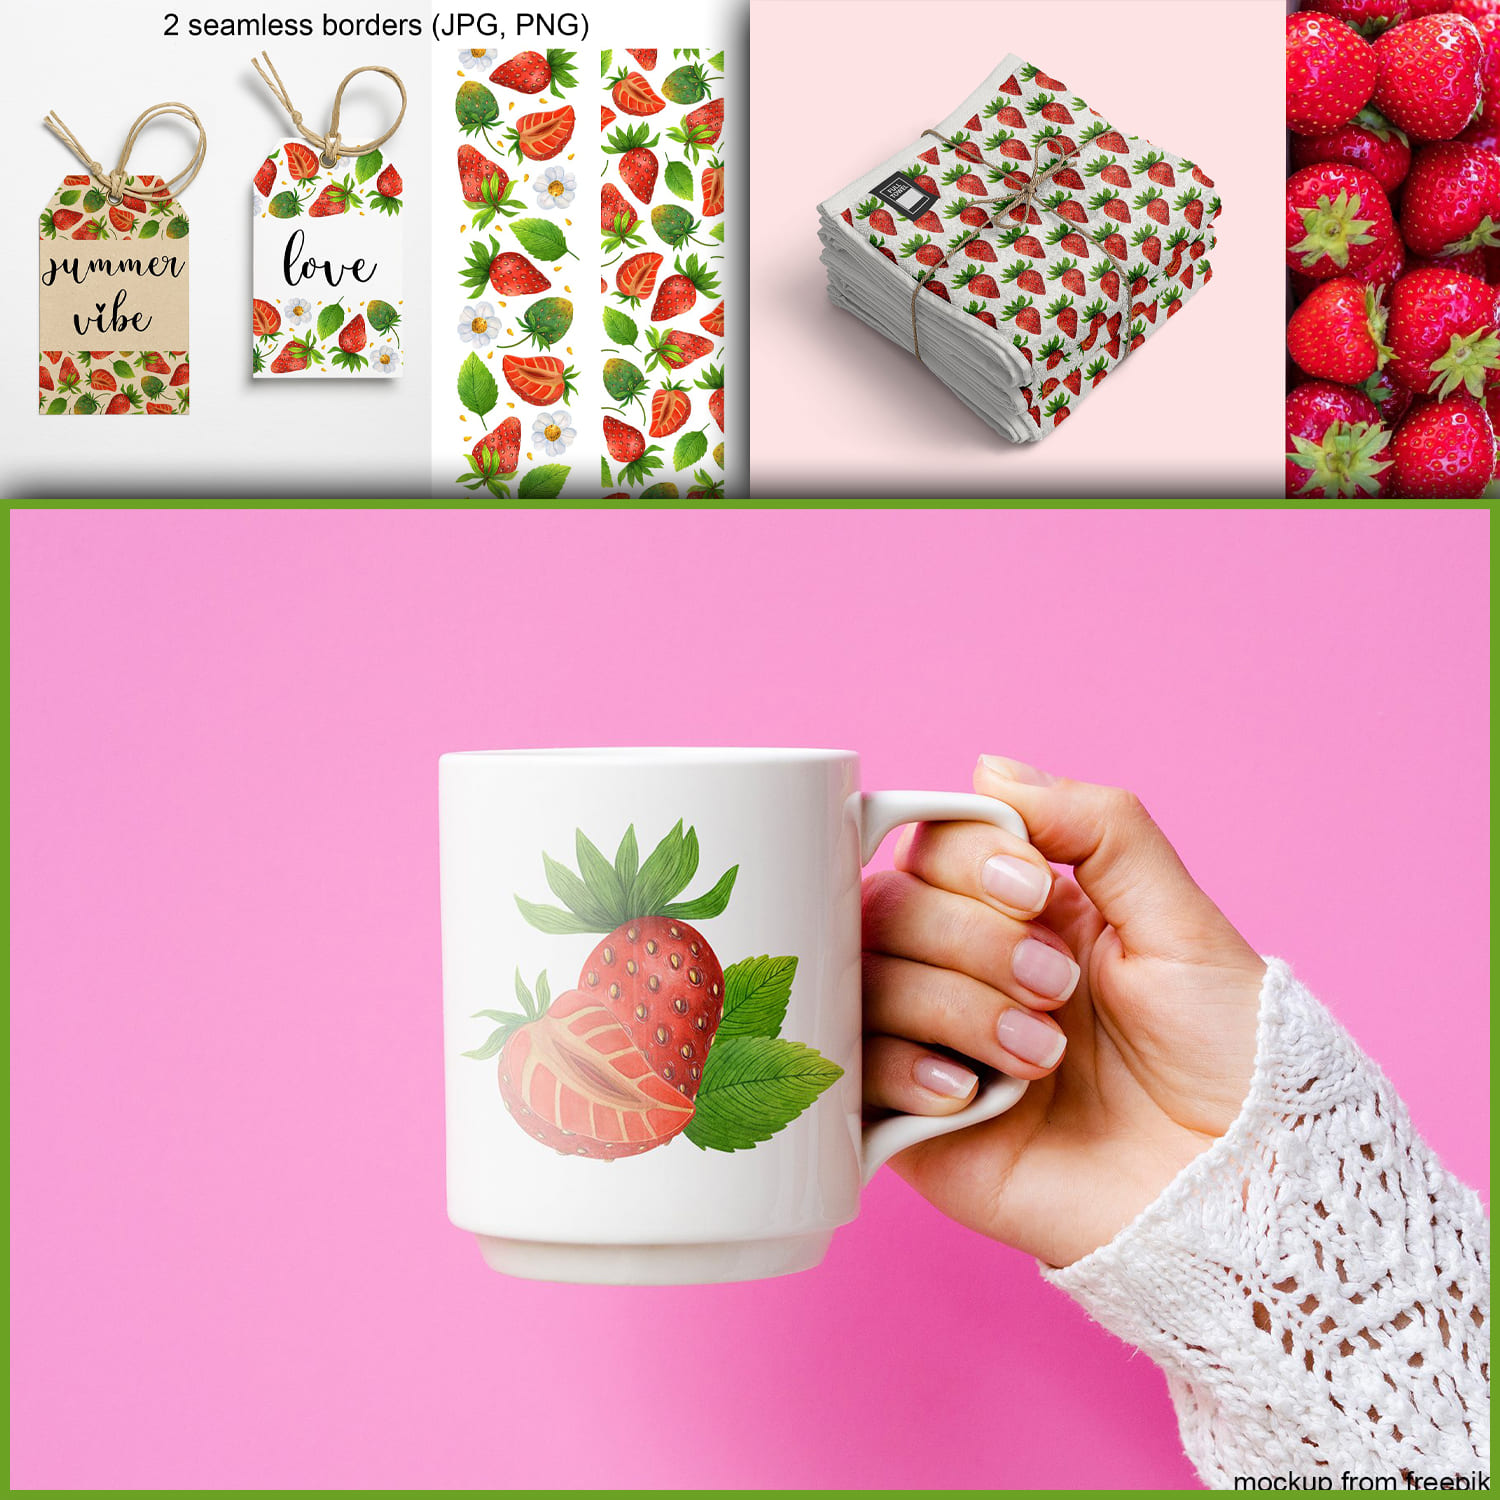 Large and small image slides using the image of strawberries.